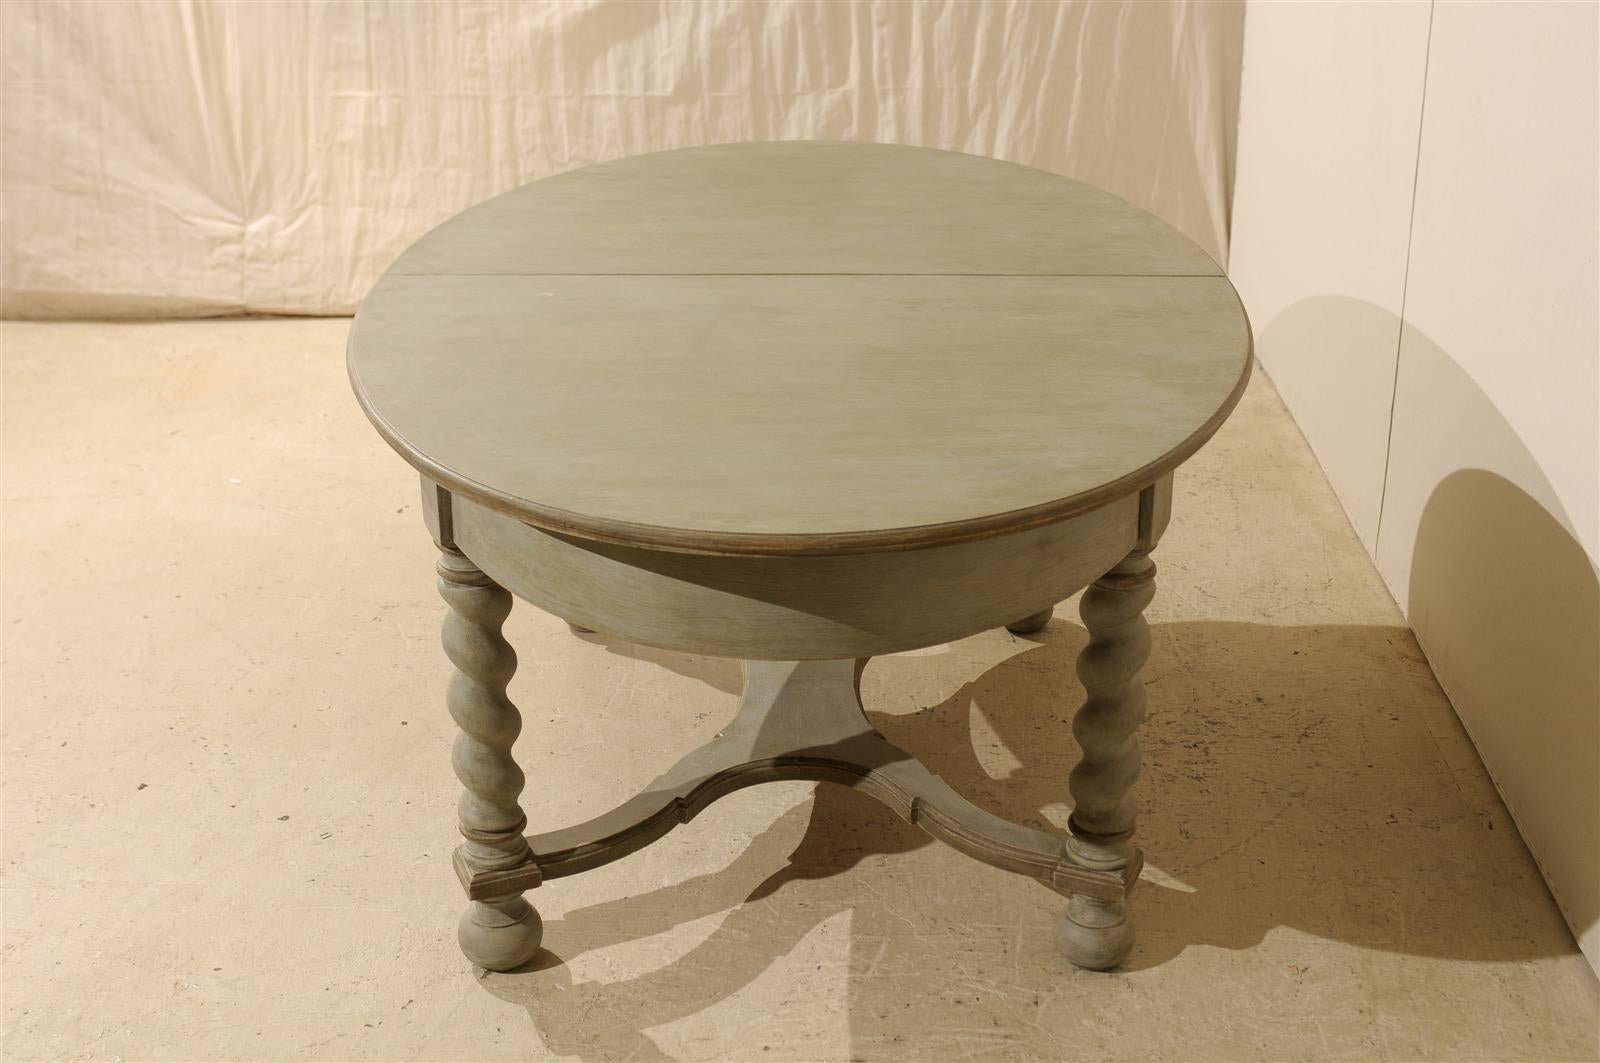 Wood Swedish Baroque Style Oval Table from the Mid-20th Century For Sale